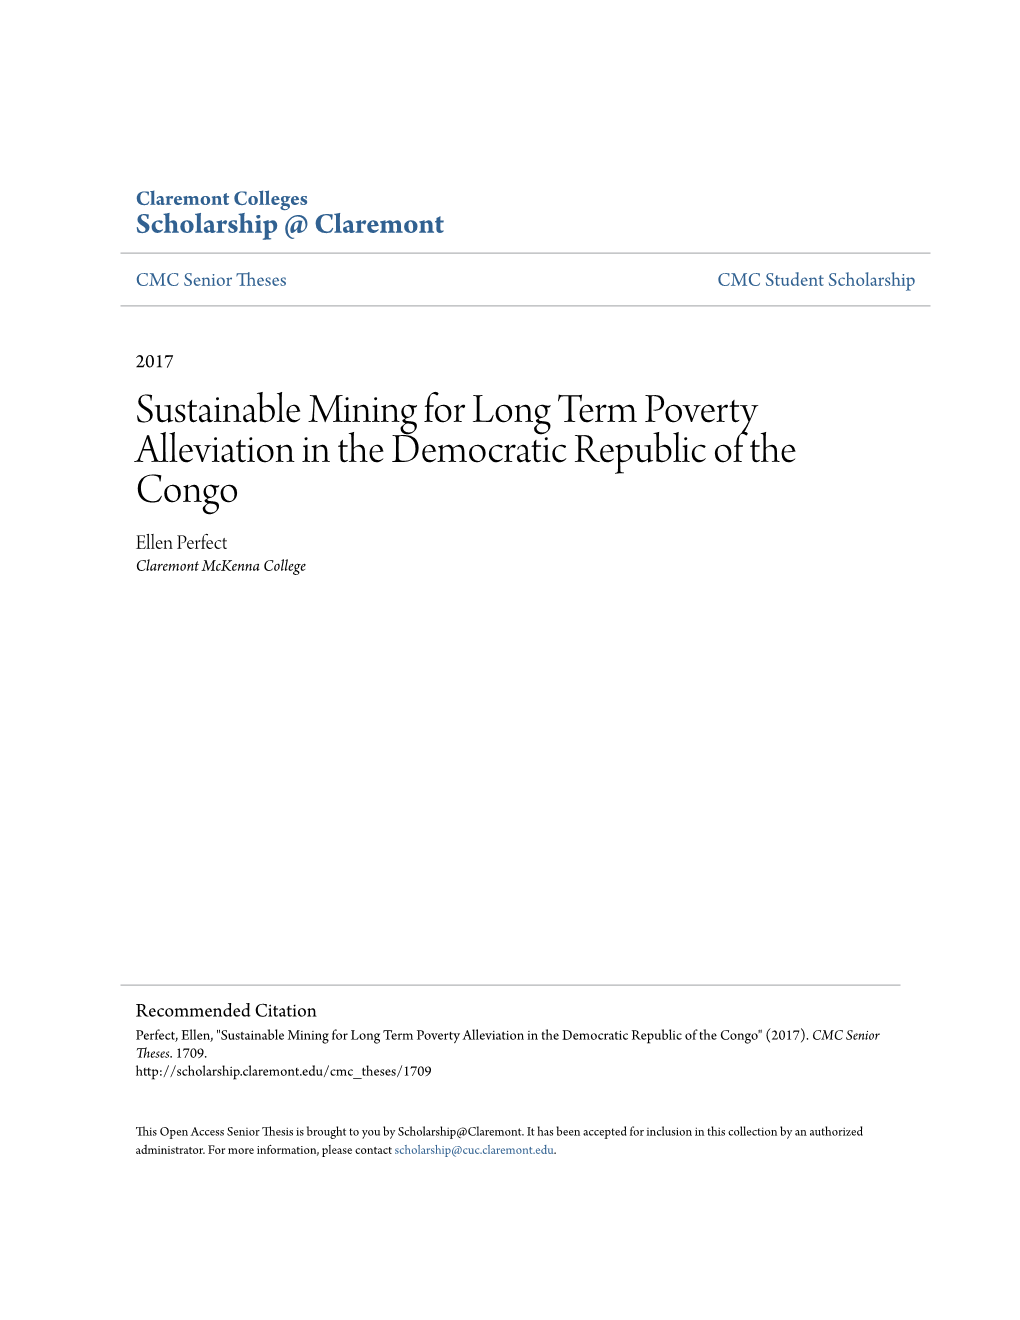 Sustainable Mining for Long Term Poverty Alleviation in the Democratic Republic of the Congo Ellen Perfect Claremont Mckenna College